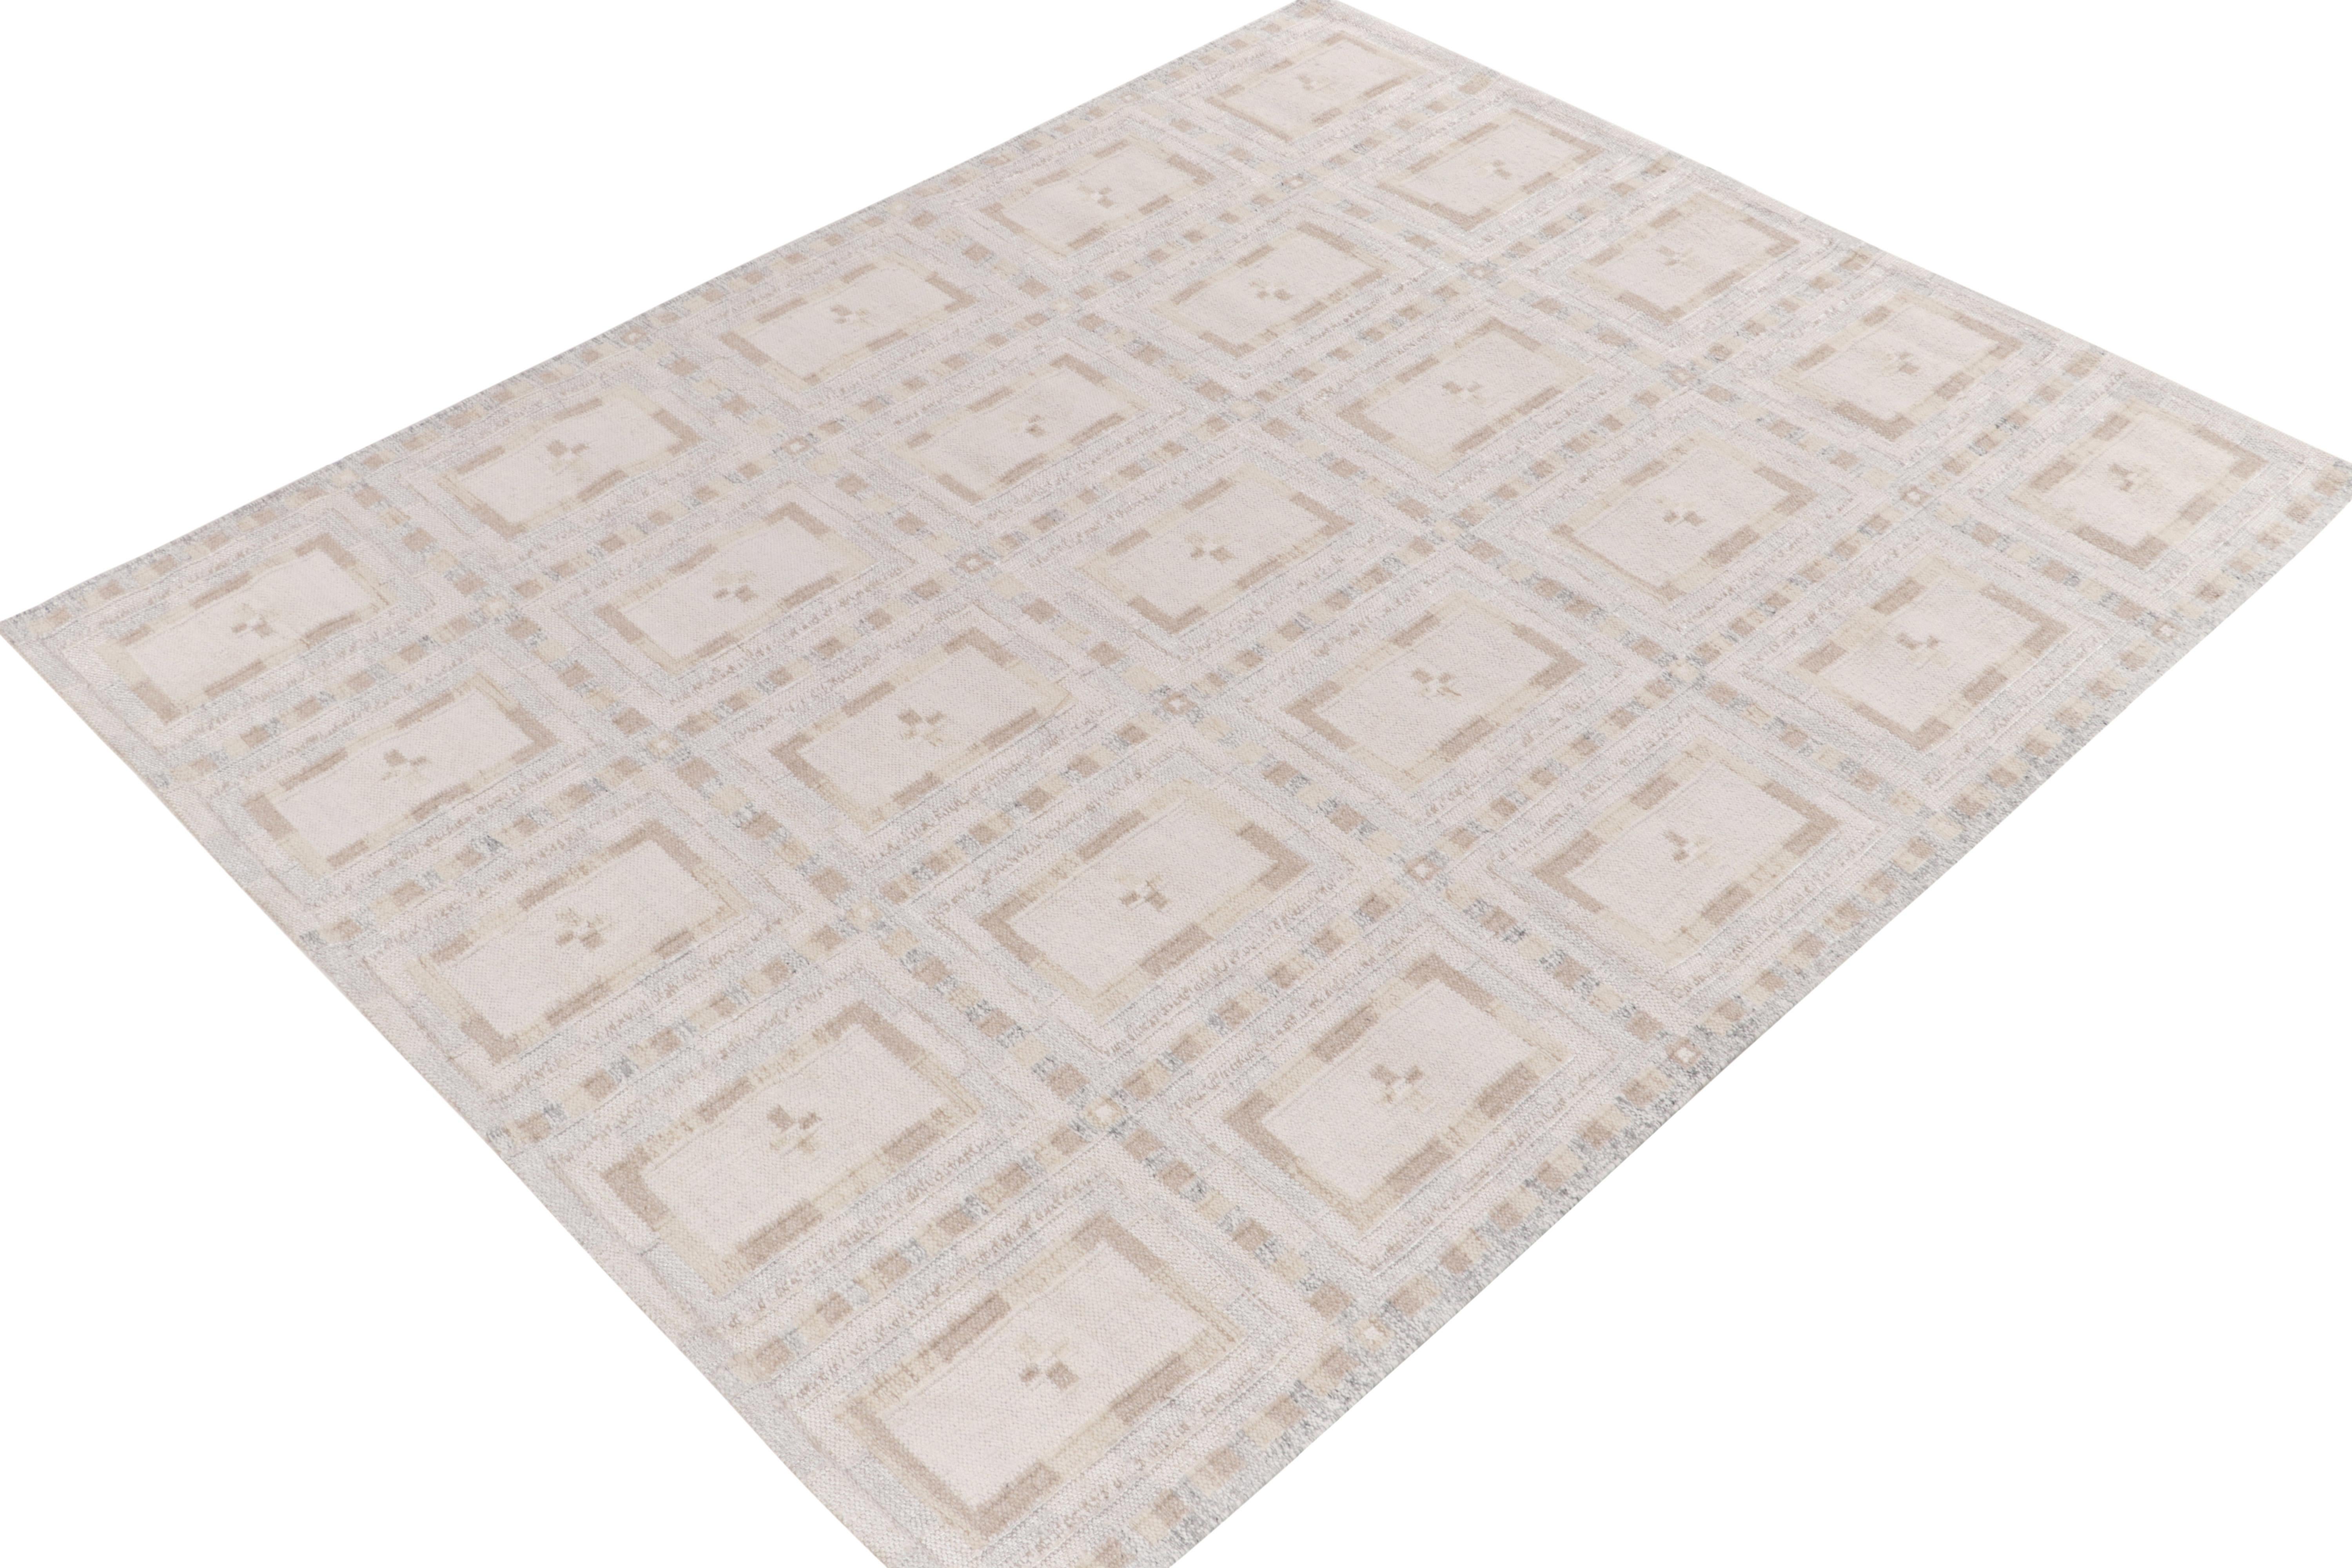 A 10x14 Swedish style kilim rug from our award-winning Scandinavian flat weave selections. The piece showcases a sophisticated play of beige & brown with gray blue for an intricate, yet cool accent to the white hues. Connoisseurs may note this